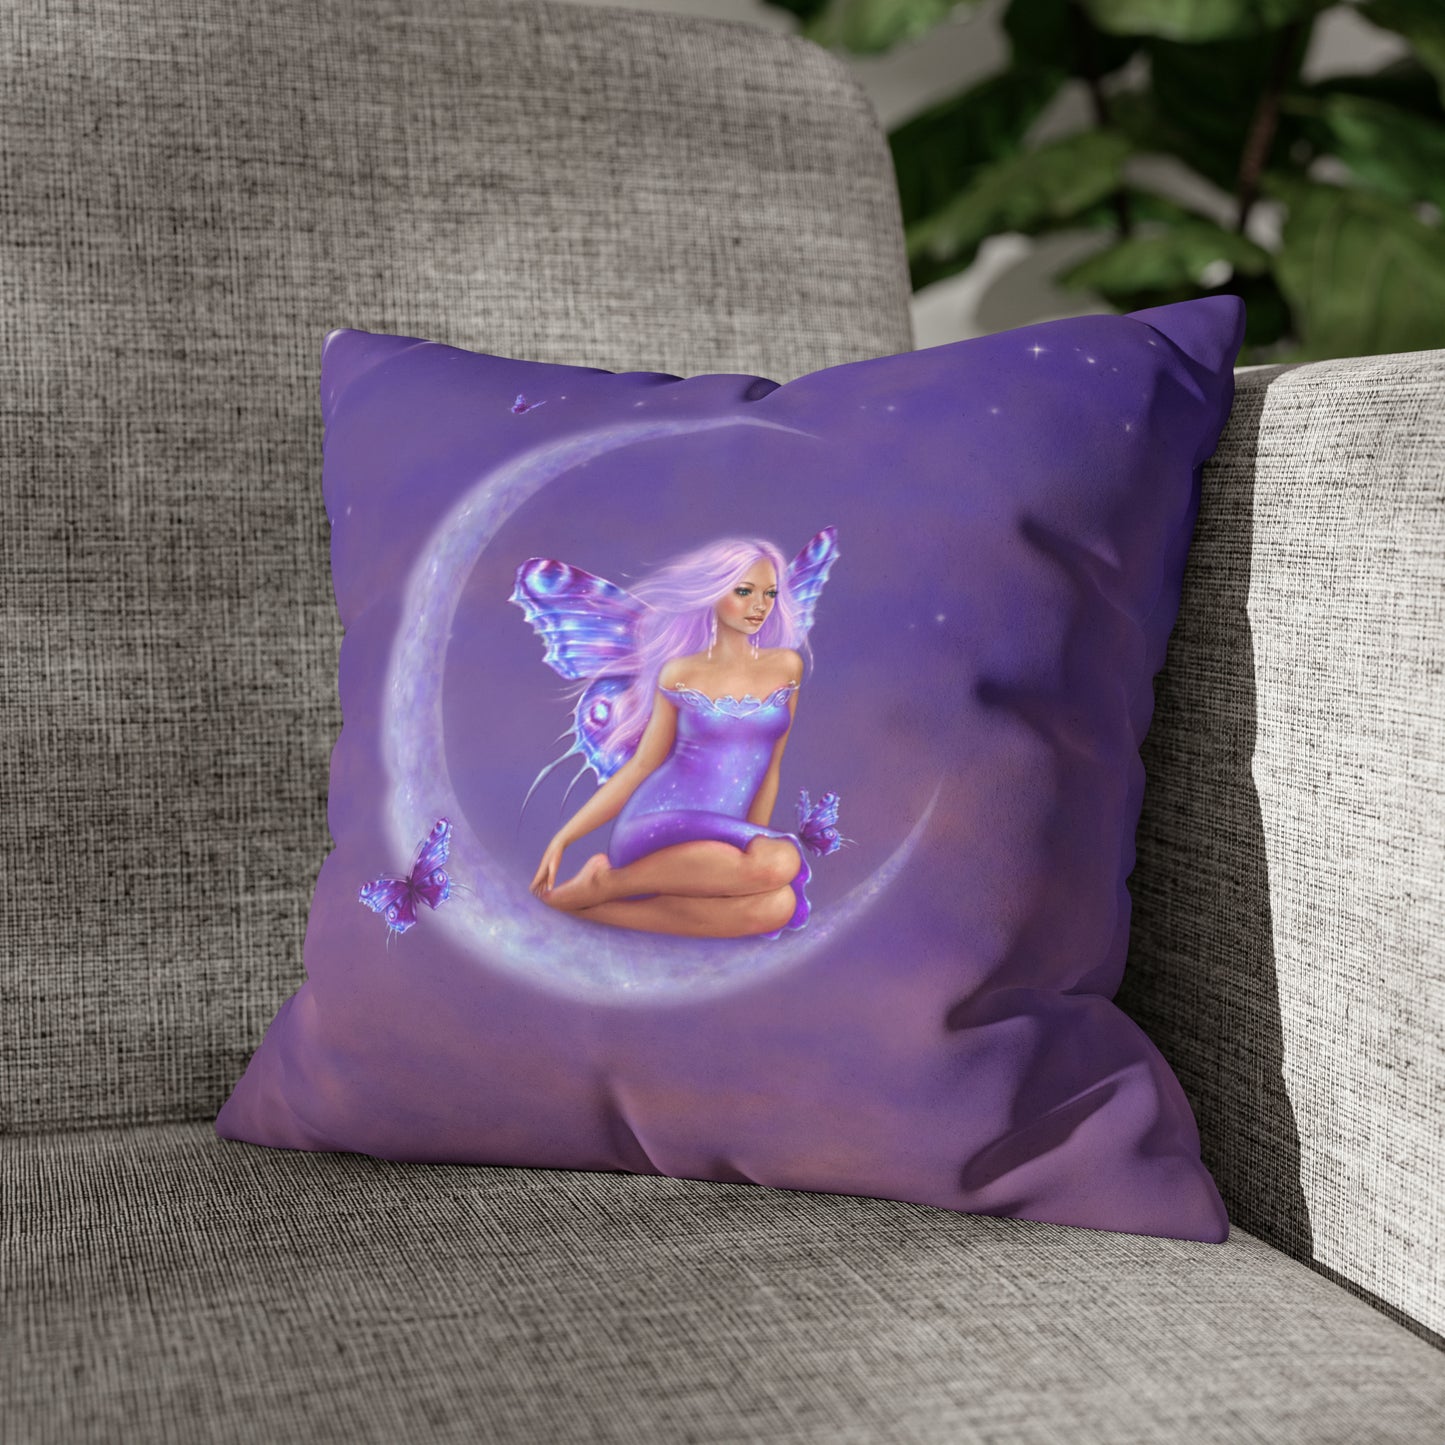 Throw Pillow Cover - Lavender Moon